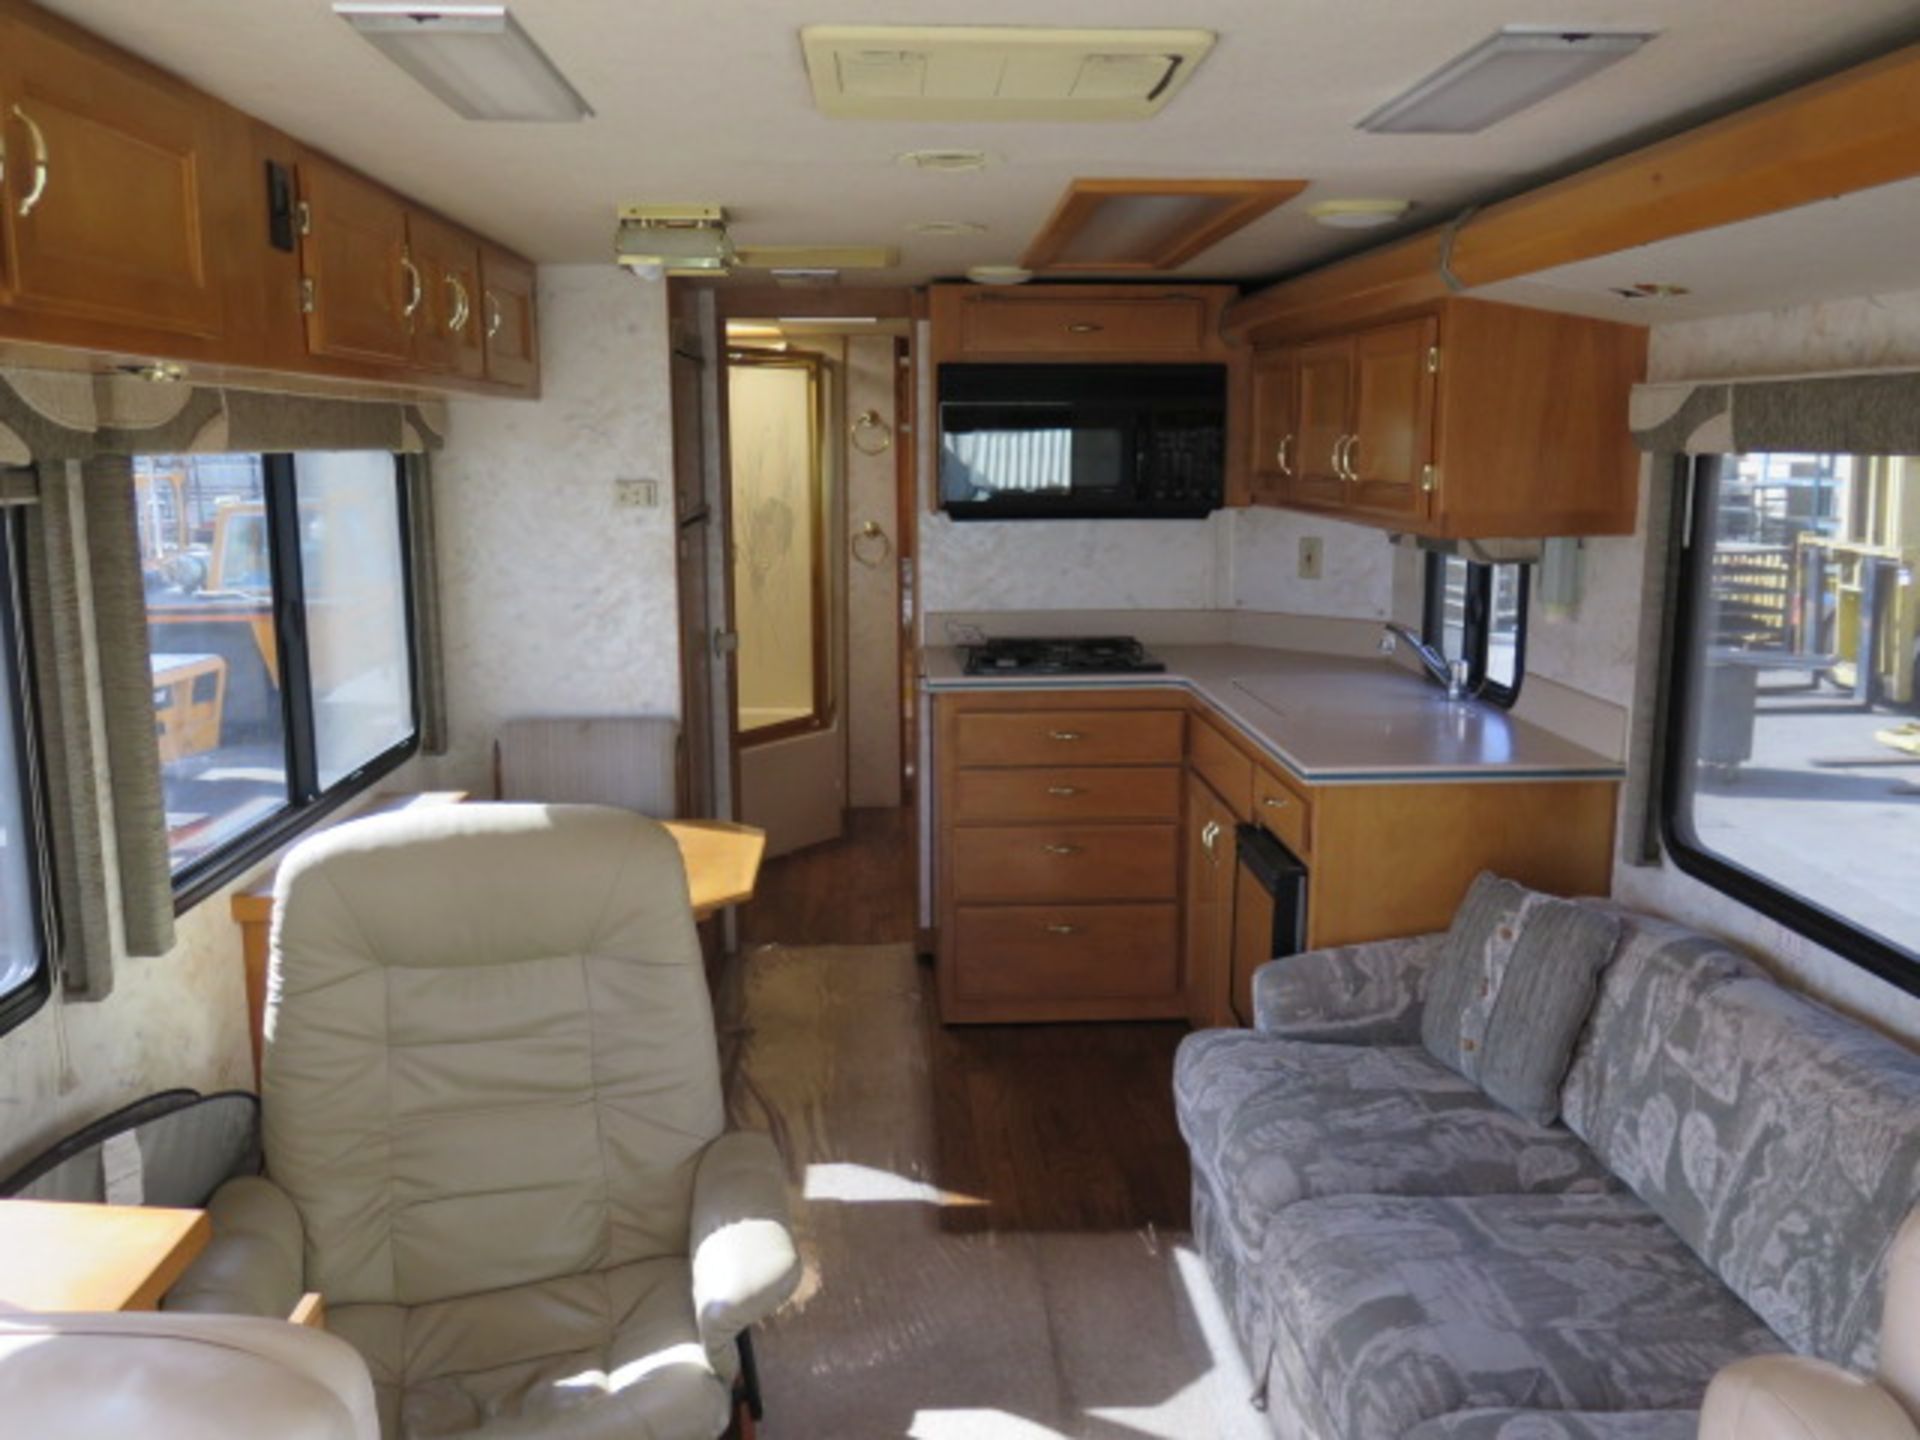 1997 Safari Motor Coacher Motor Home Lisc# 5PEJ100 w/ CAT Diesel Engine, Automatic Trans, SOLD AS IS - Image 23 of 54